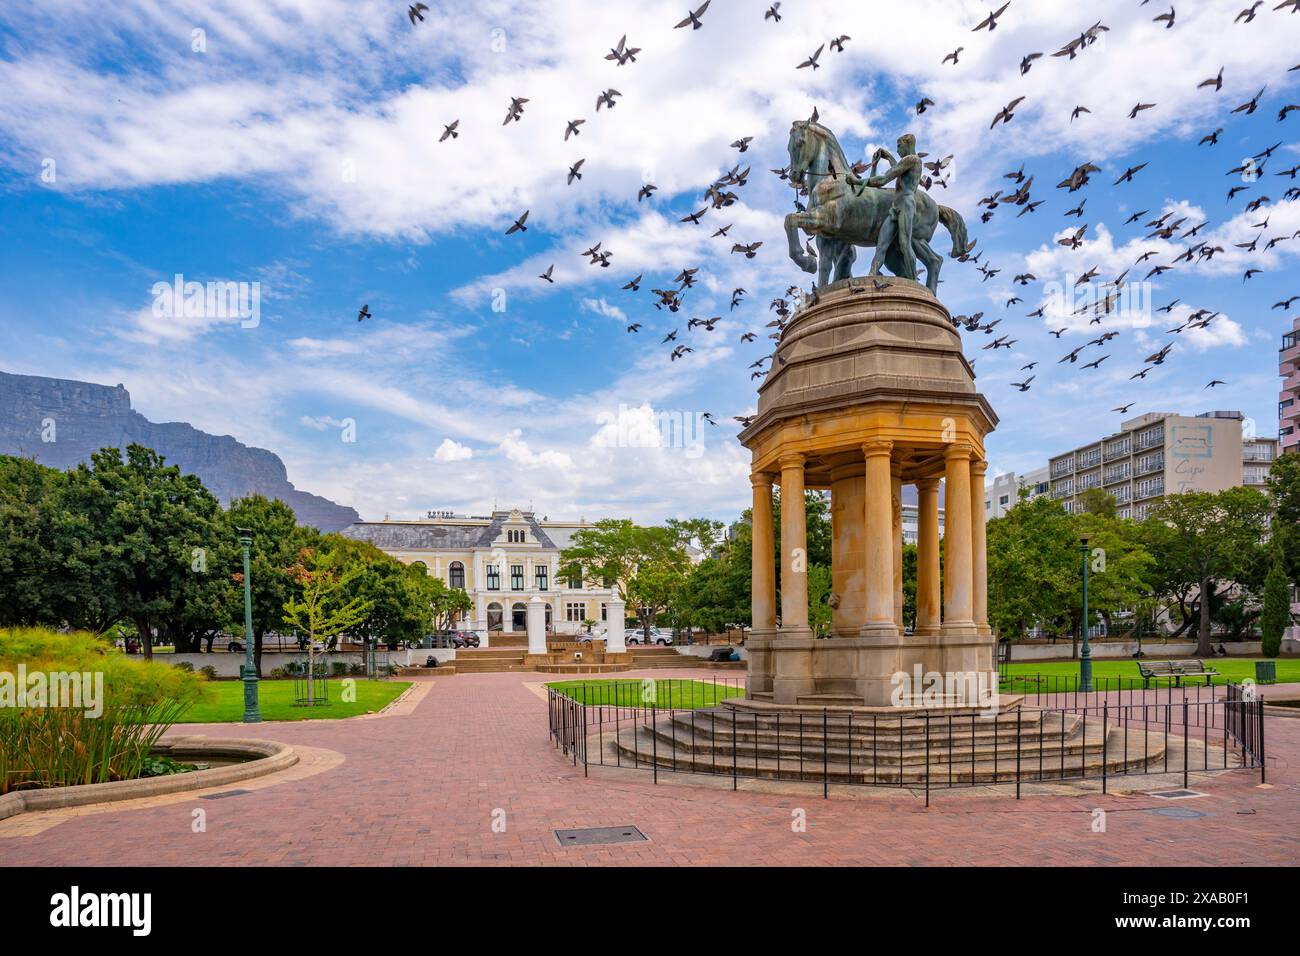 View of Delville Wood Memorial in Company's Garden and Table Mountain in background, Cape Town, Western Cape, South Africa, Africa Stock Photo